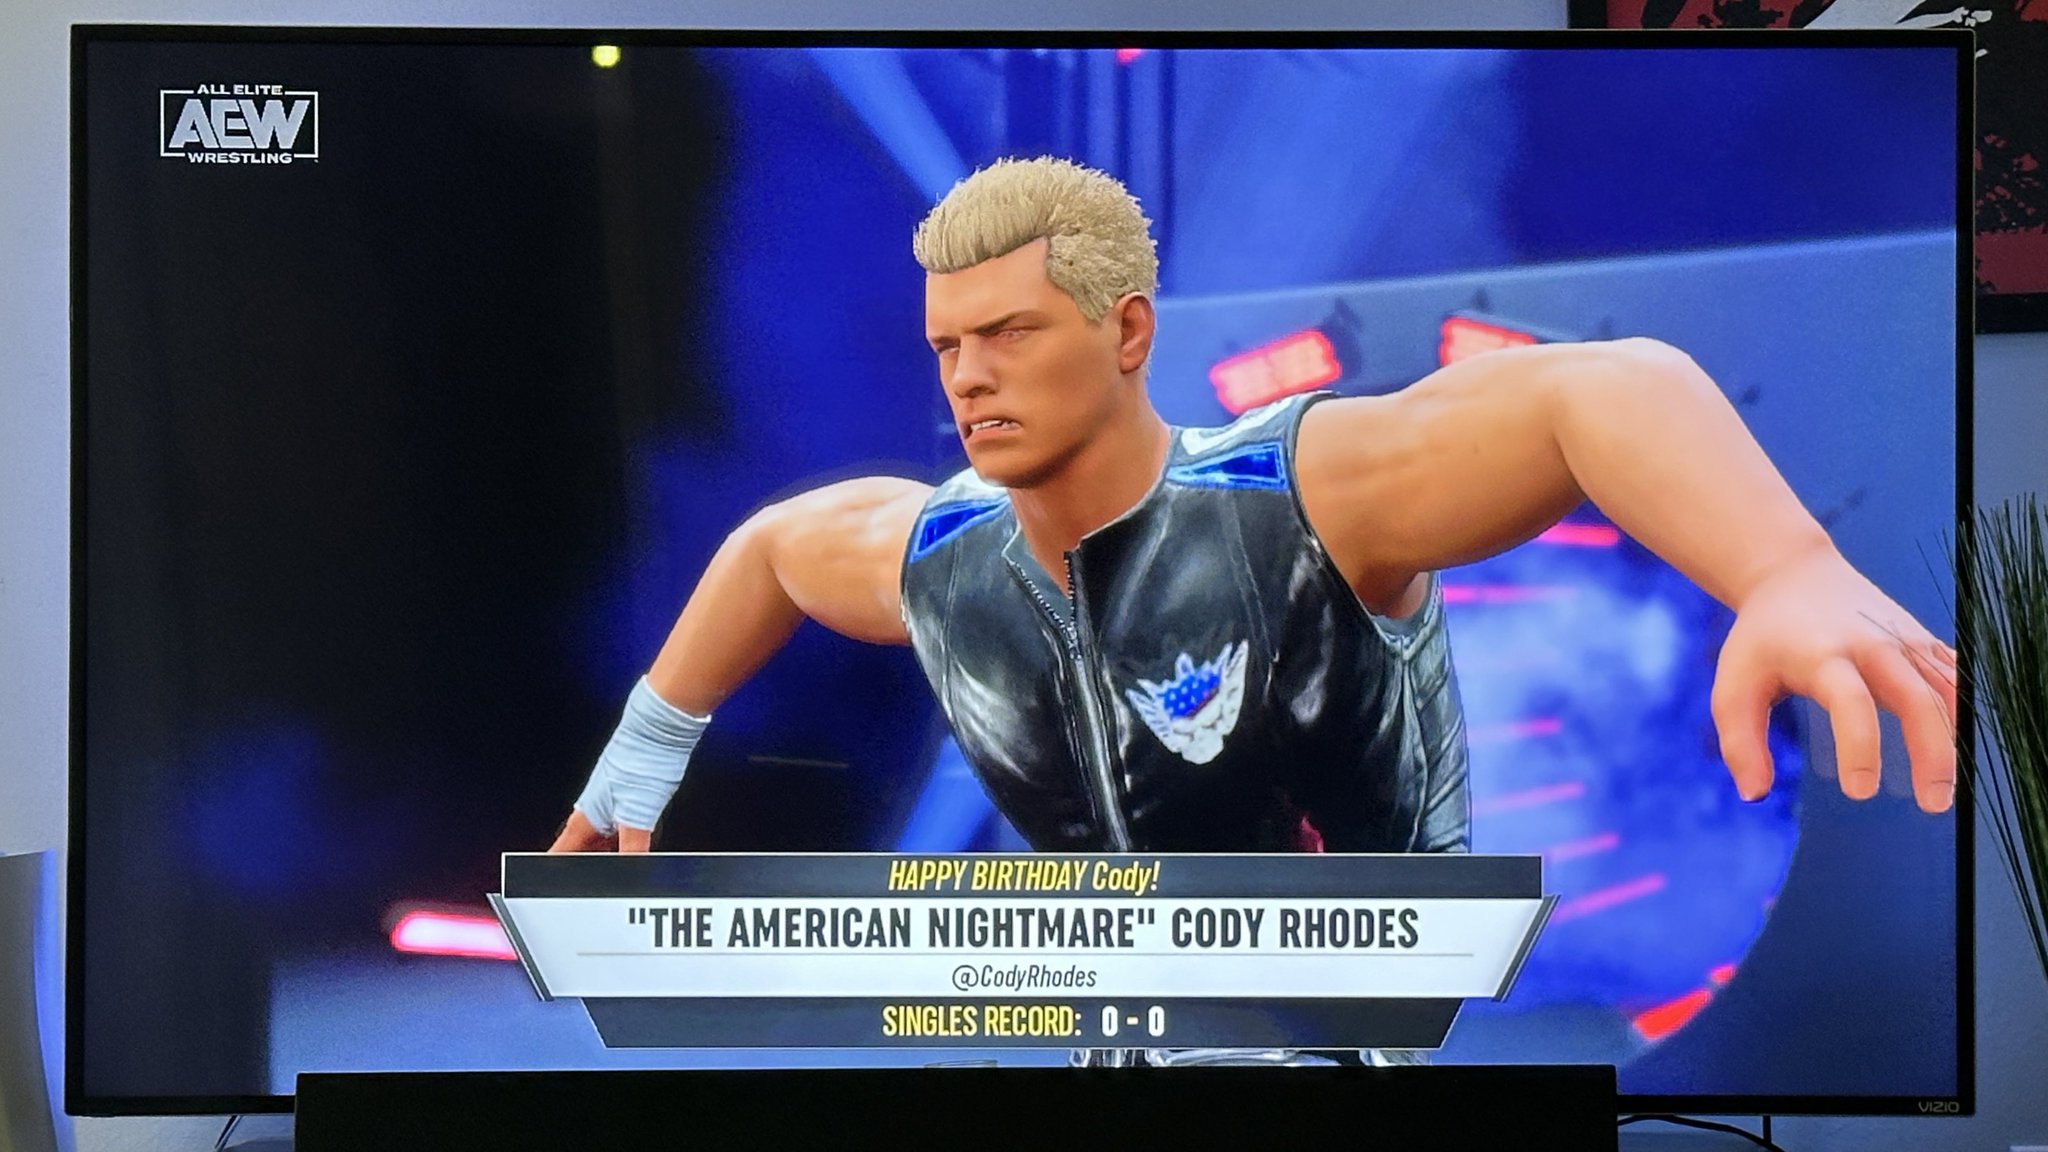 Y all check the chyron! They wished Cody Rhodes a Happy Birthday! Love the little details in AEW: Fight Forever! 